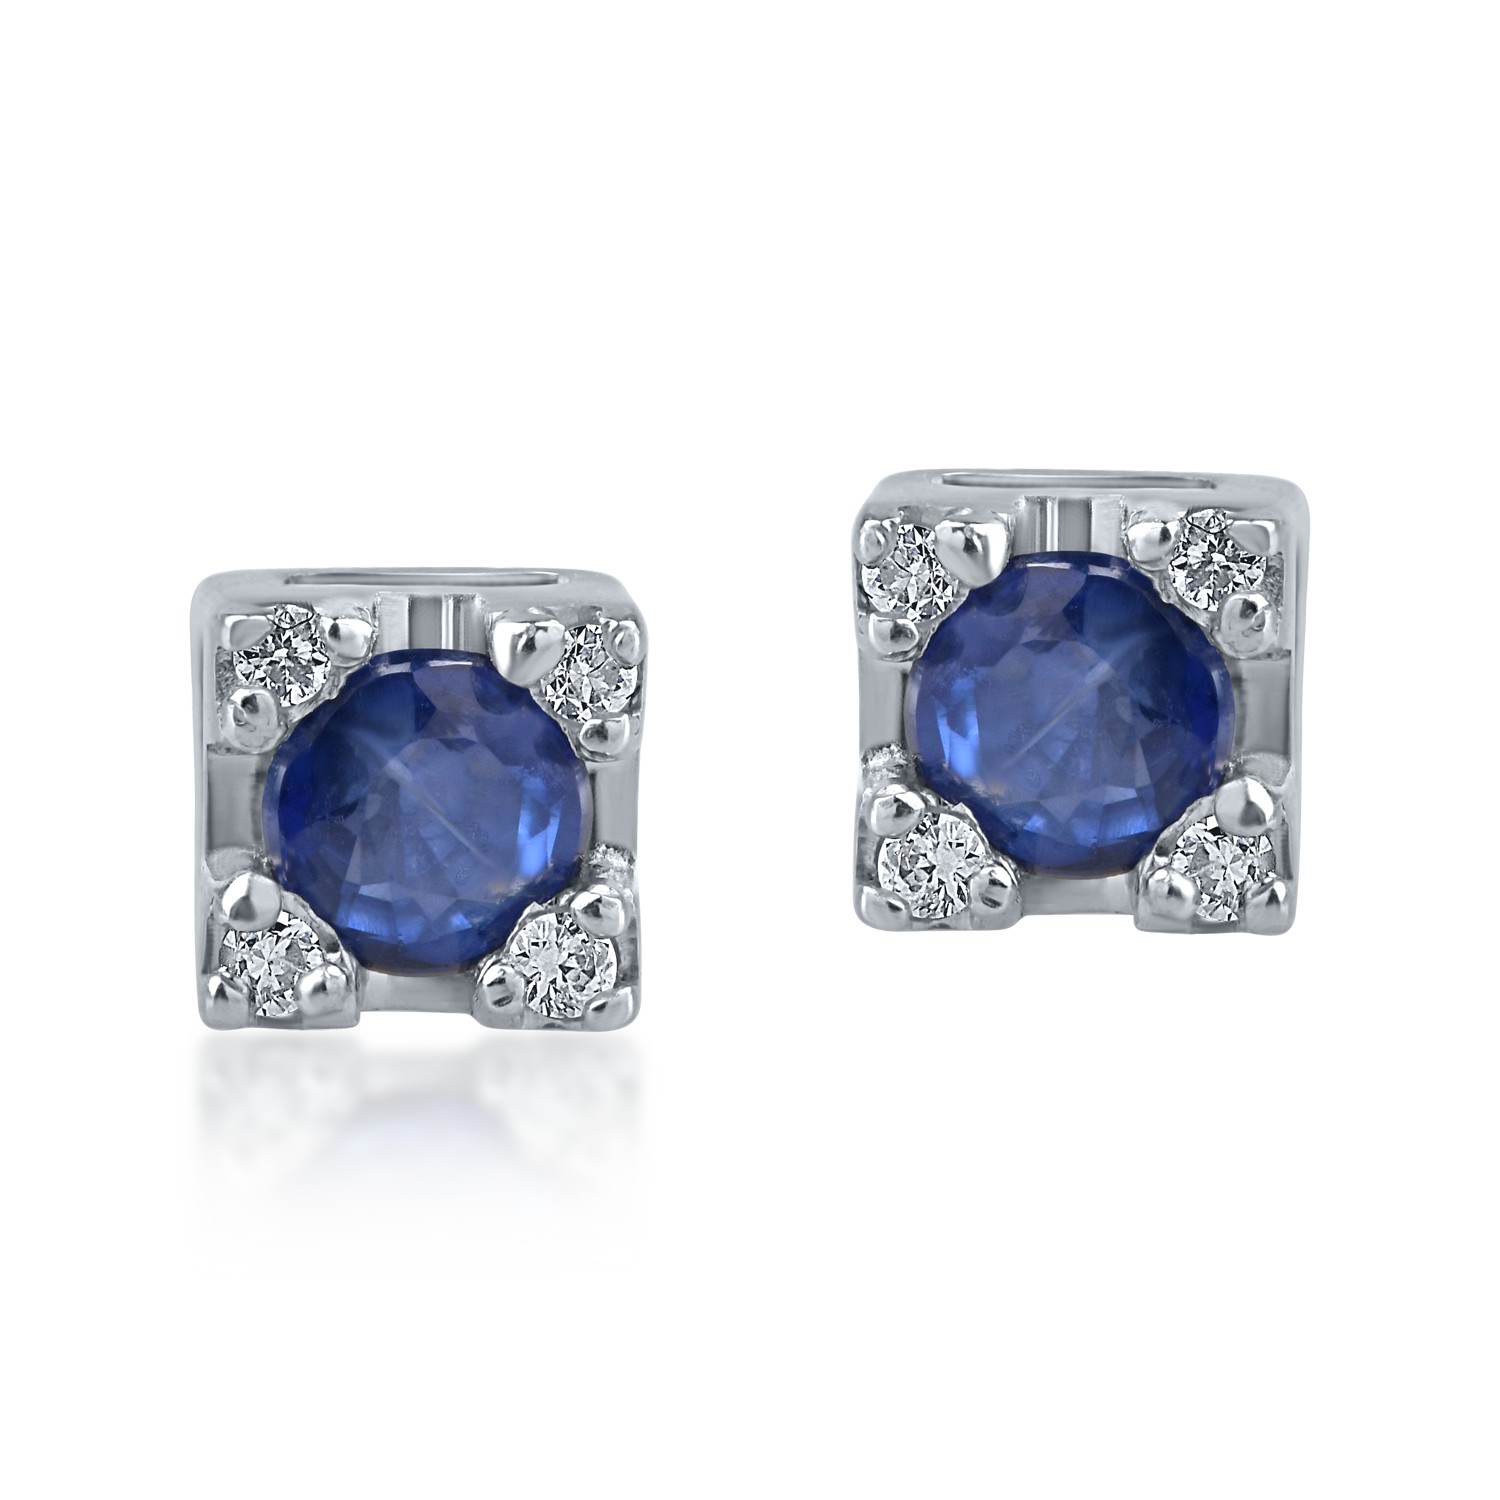 White gold minimalist earrings with 0.29ct sapphires and 0.03ct diamonds